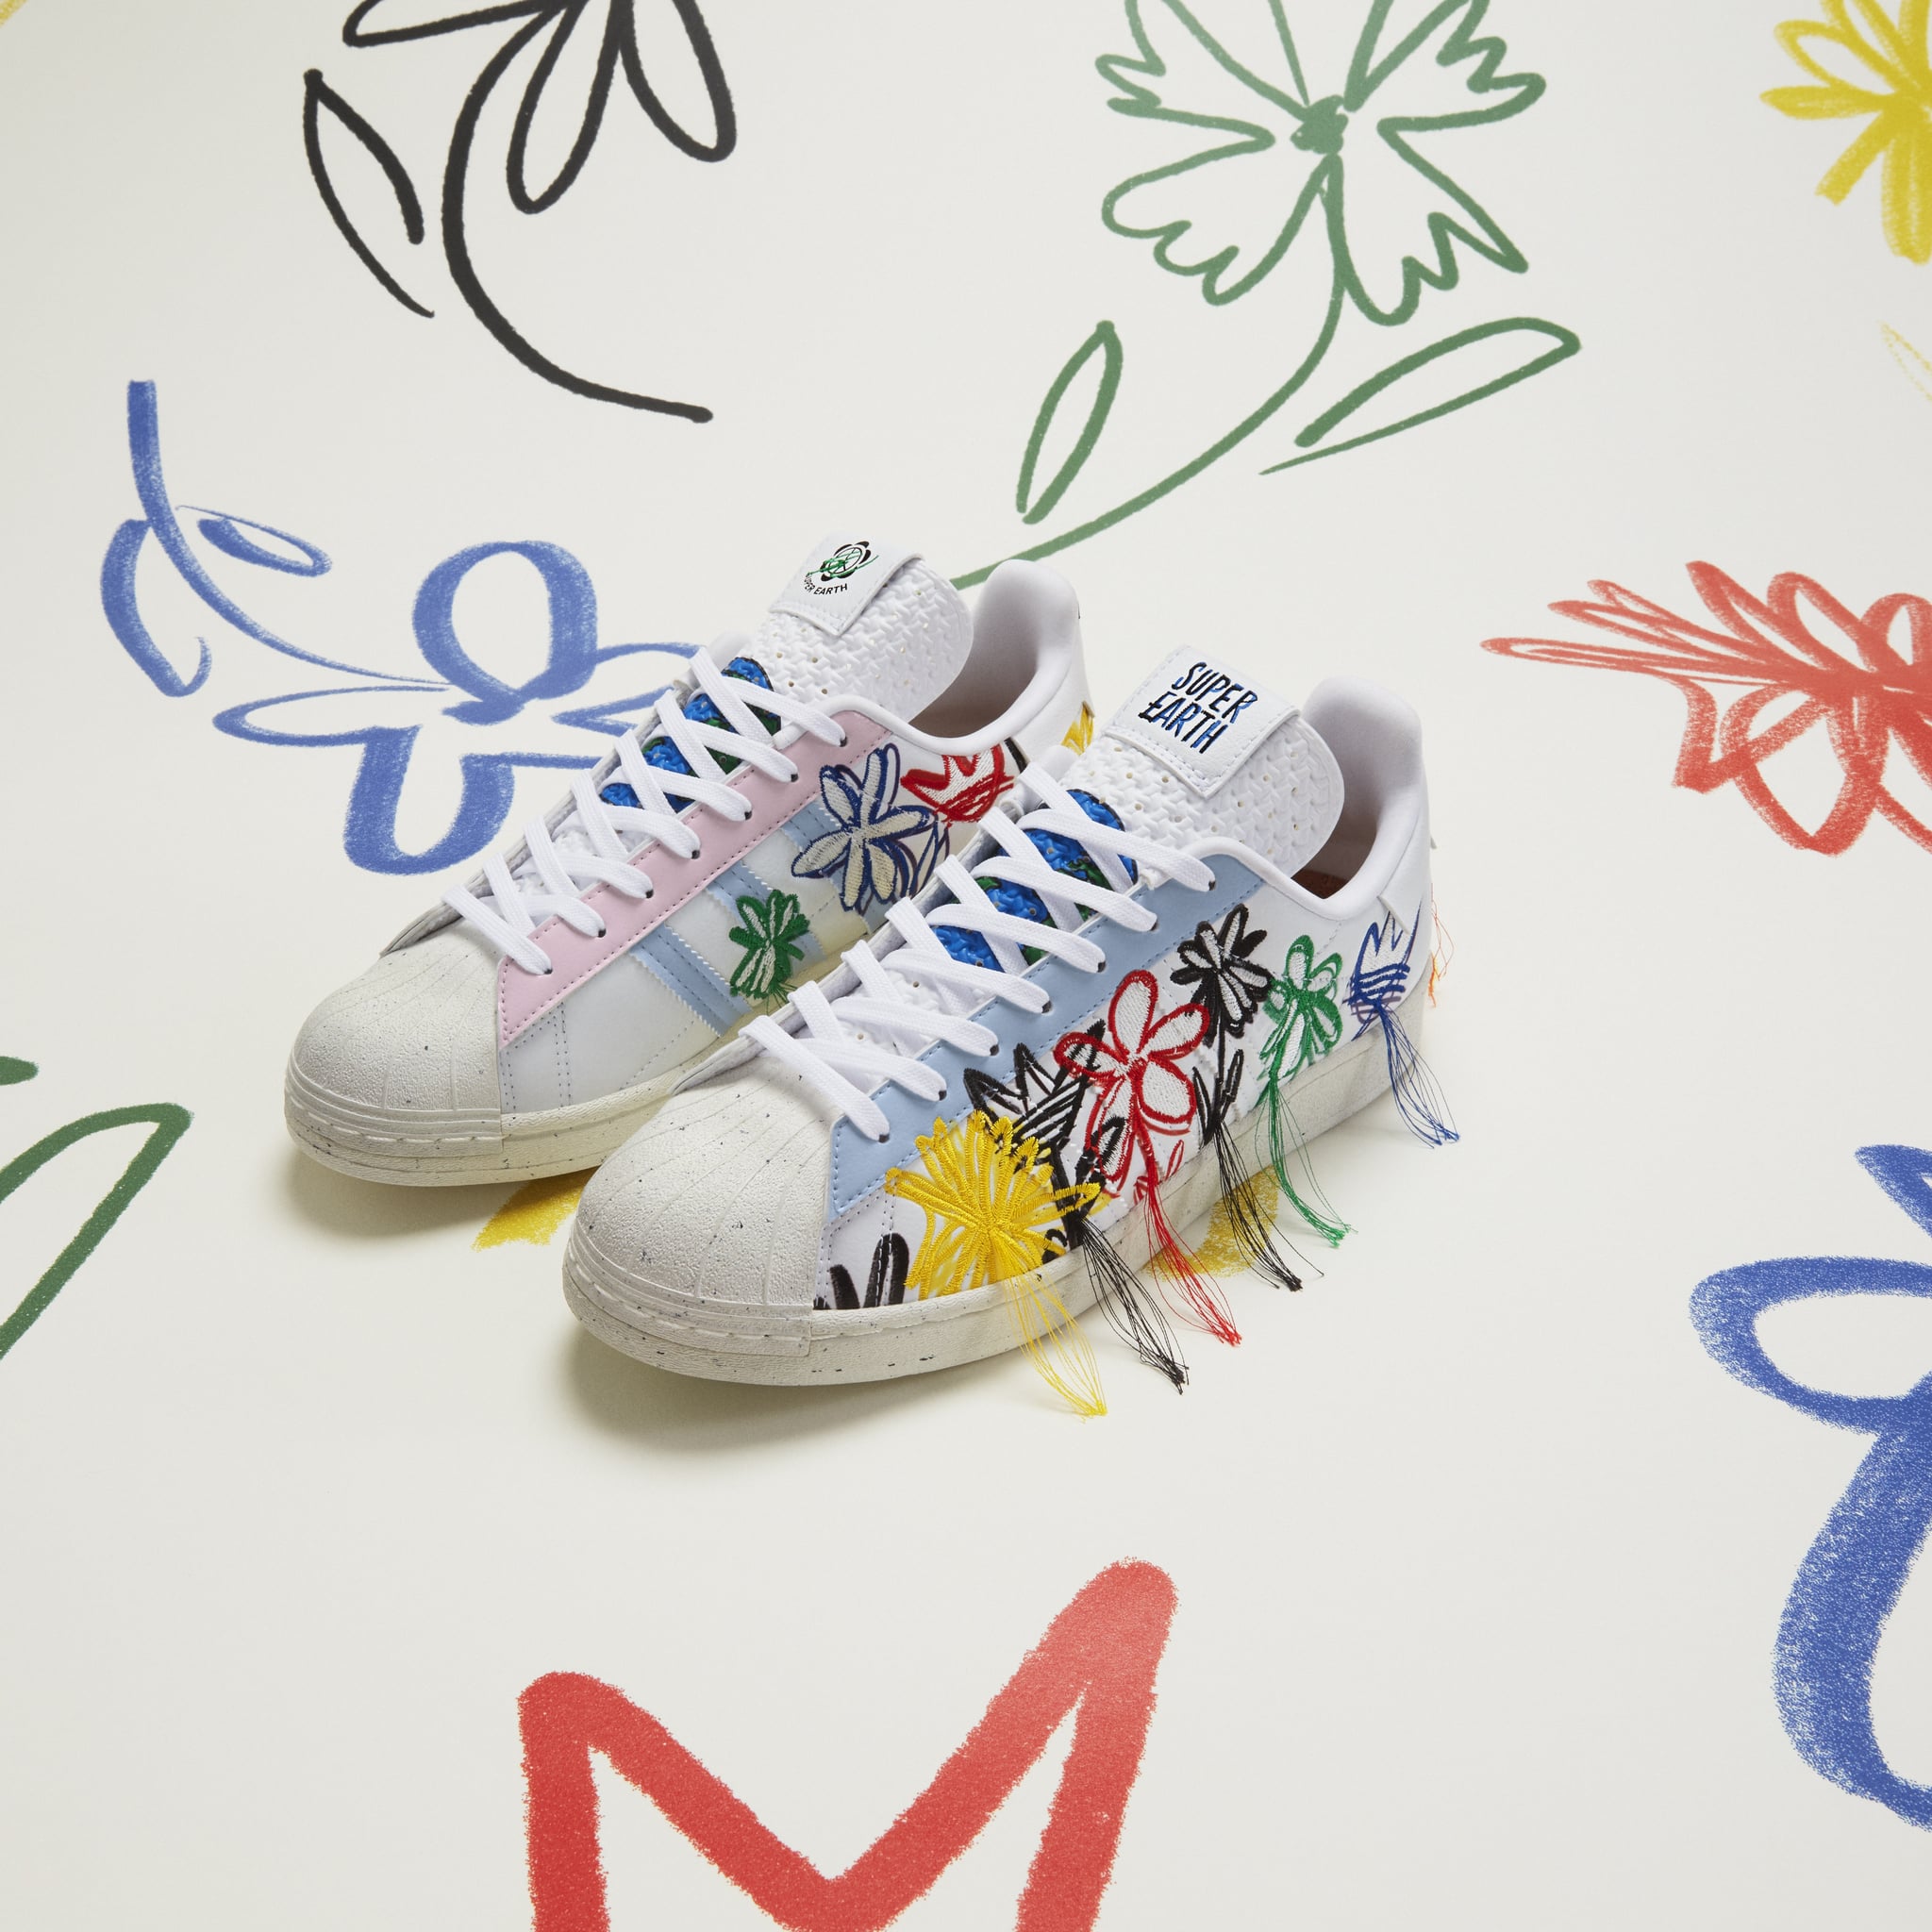 adidas sneakers colorful